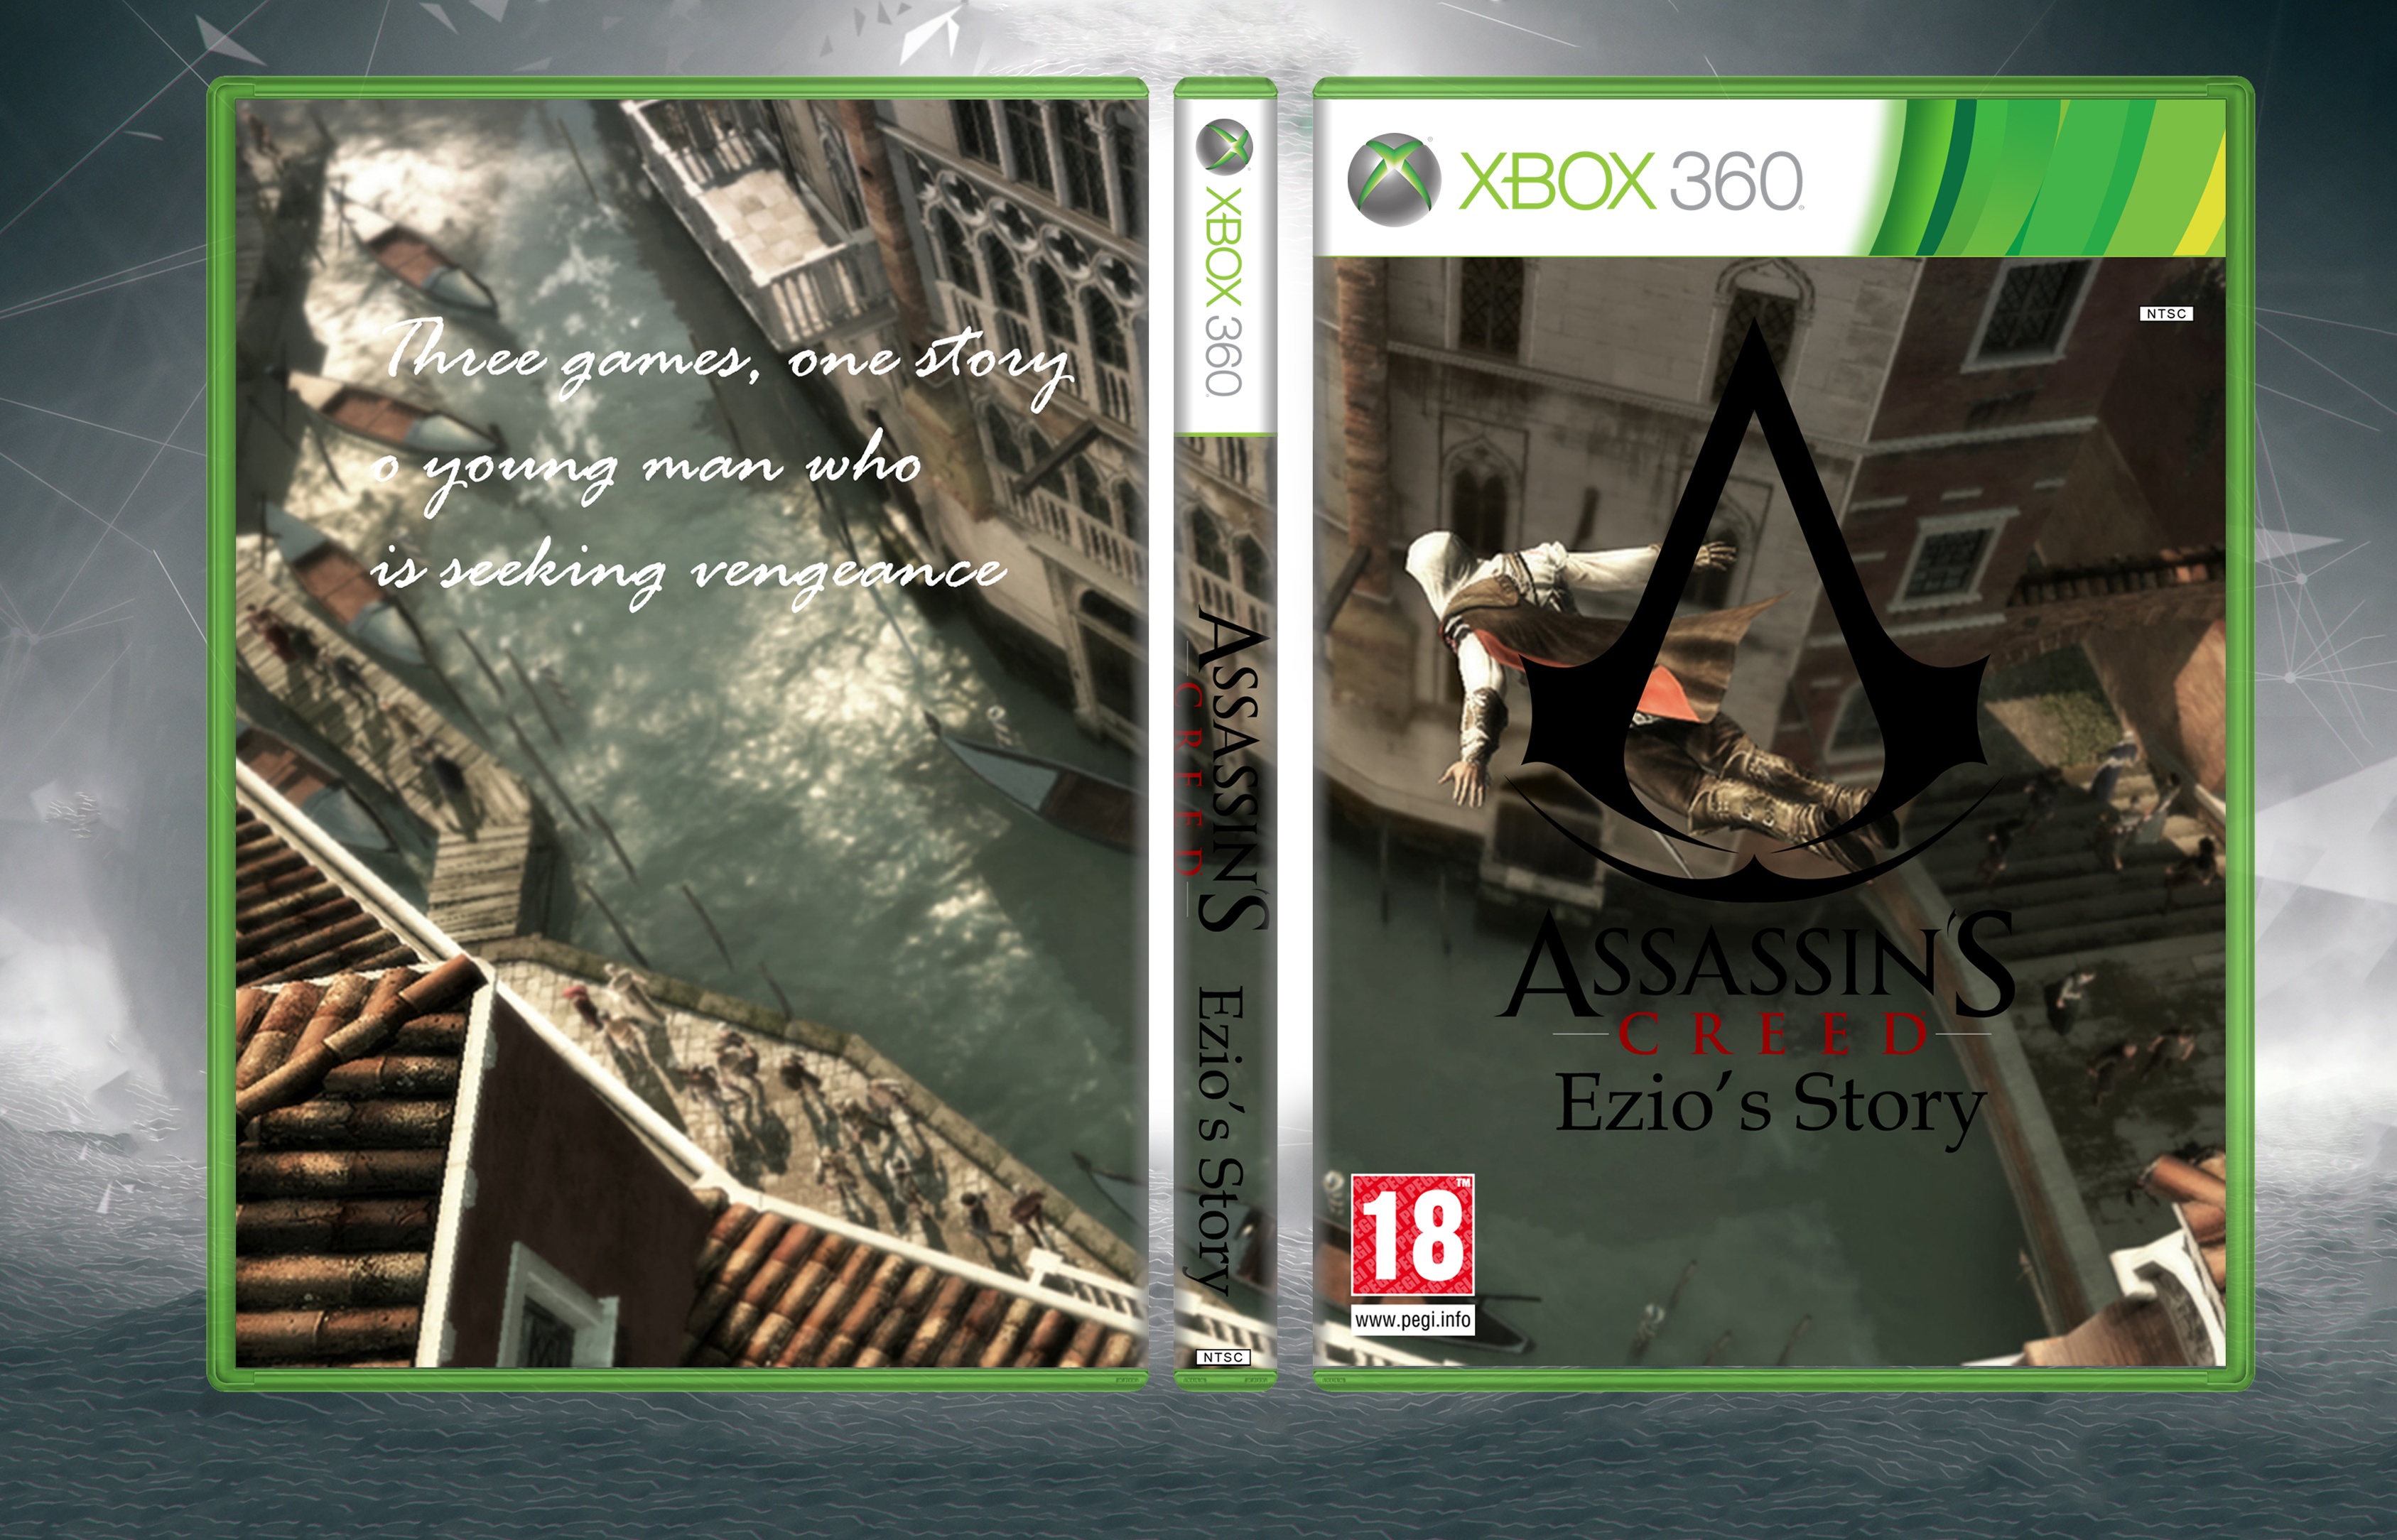 Assasin's Creed Limited Edition Ezio's story box cover